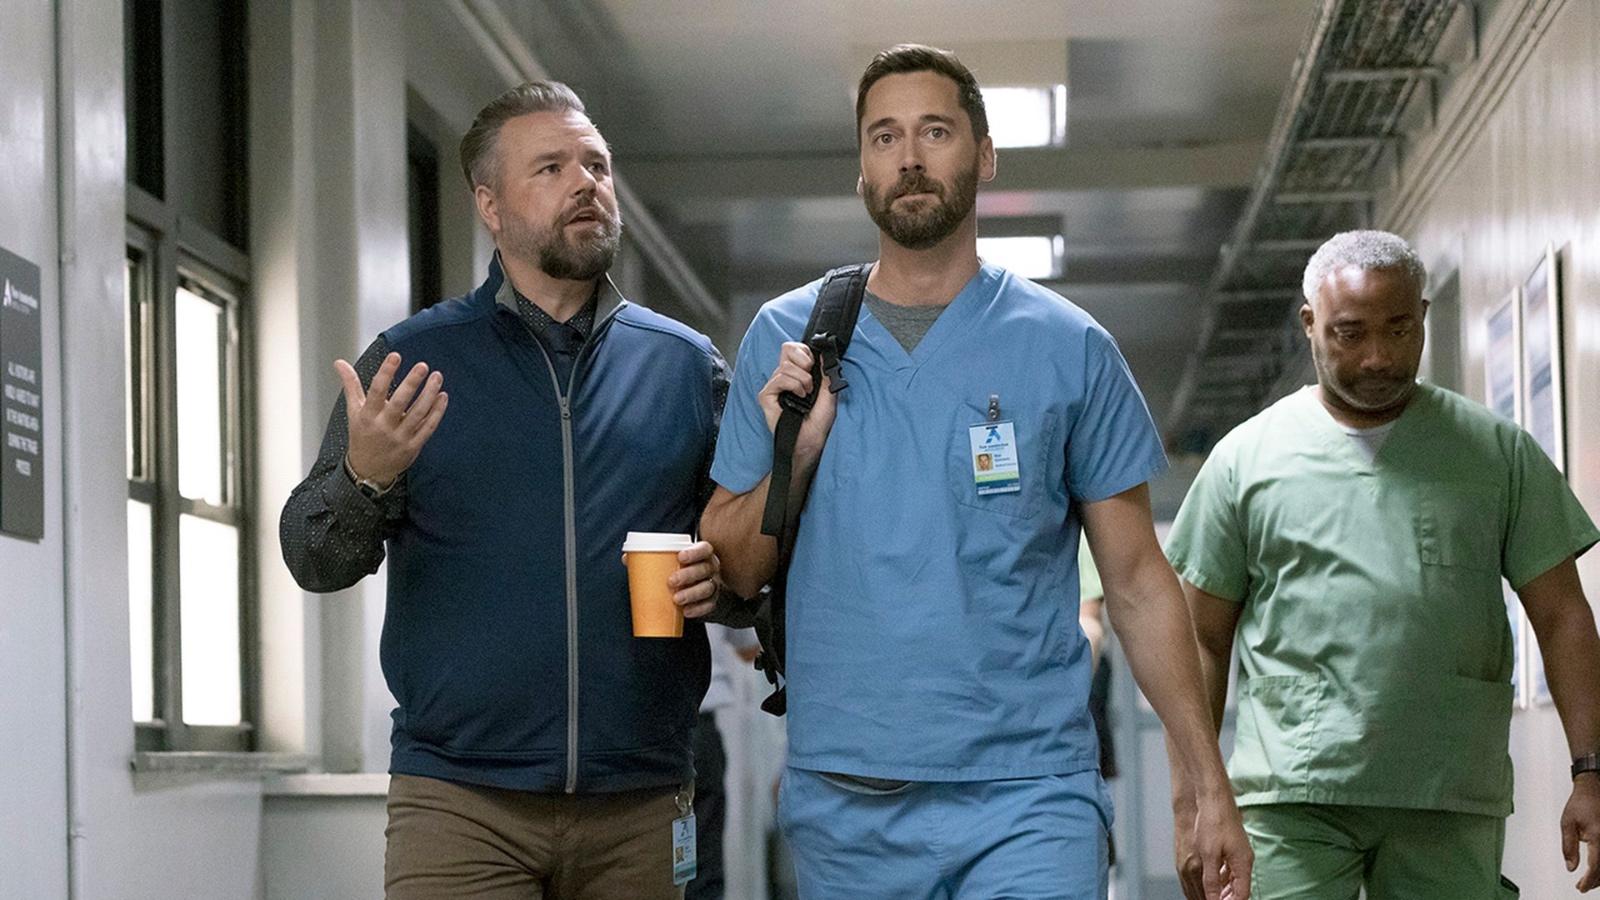 Ryan Eggold in New Amsterdam as Dr. Max Goodwin